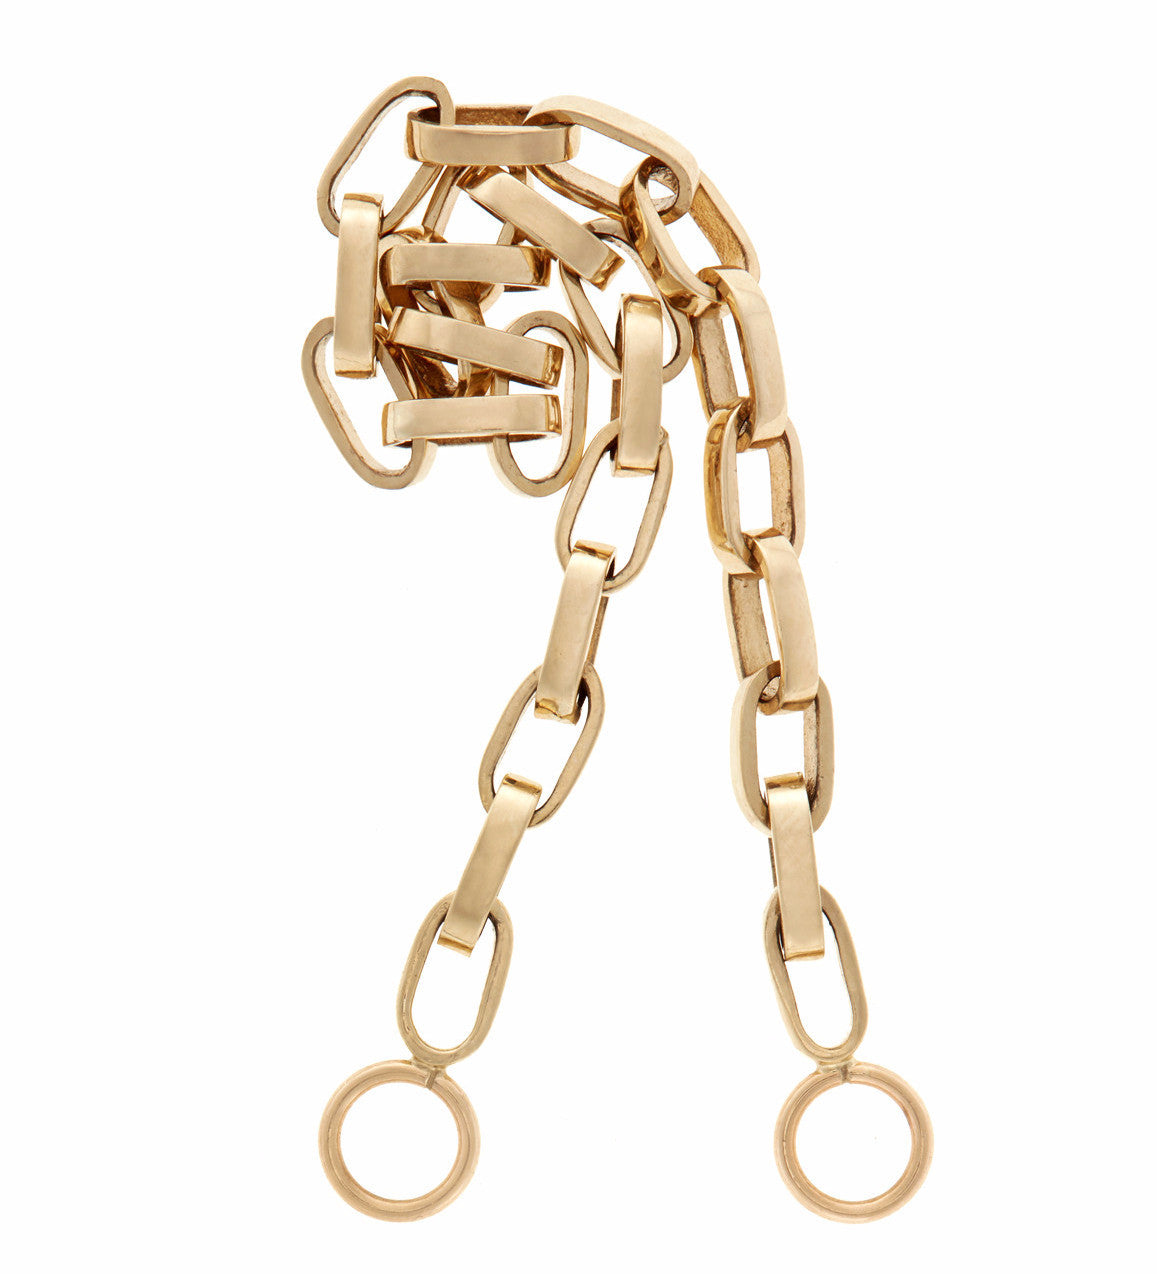 Curled up gold Marla Aaron biker chain against white backdrop